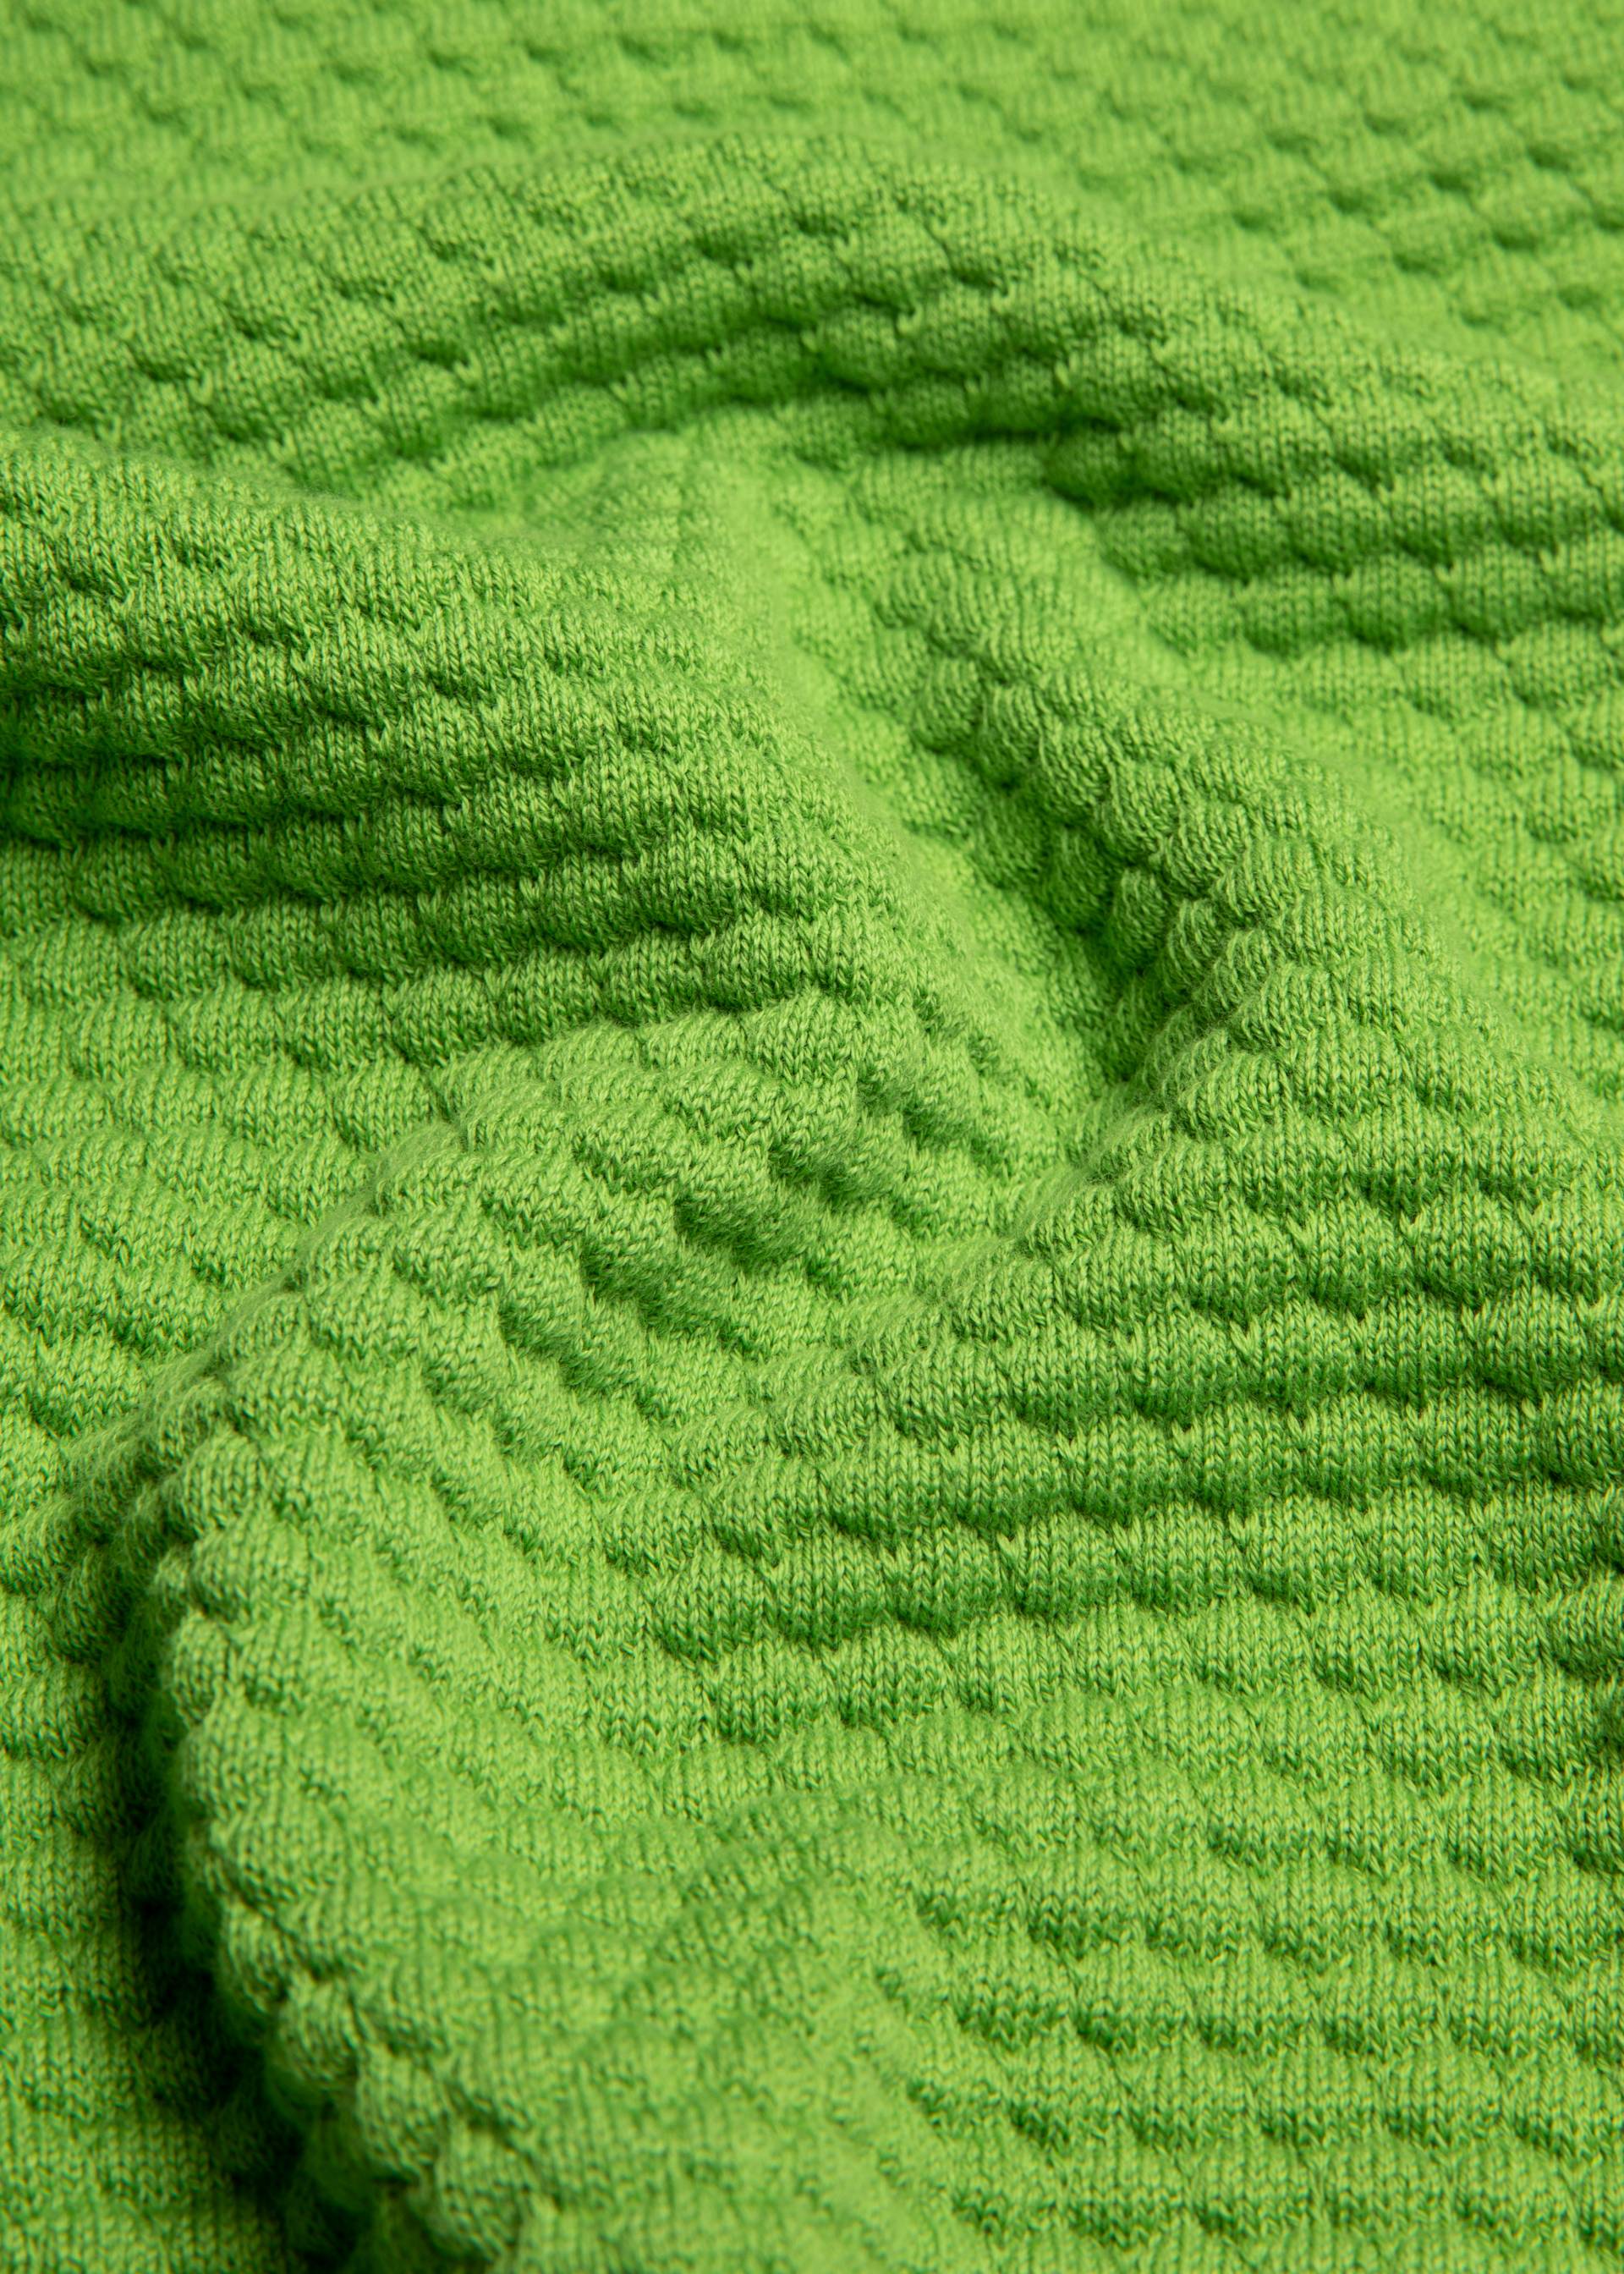 Knitted Jumper Chic Promenade, something about green apples, Knitted Jumpers & Cardigans, Green